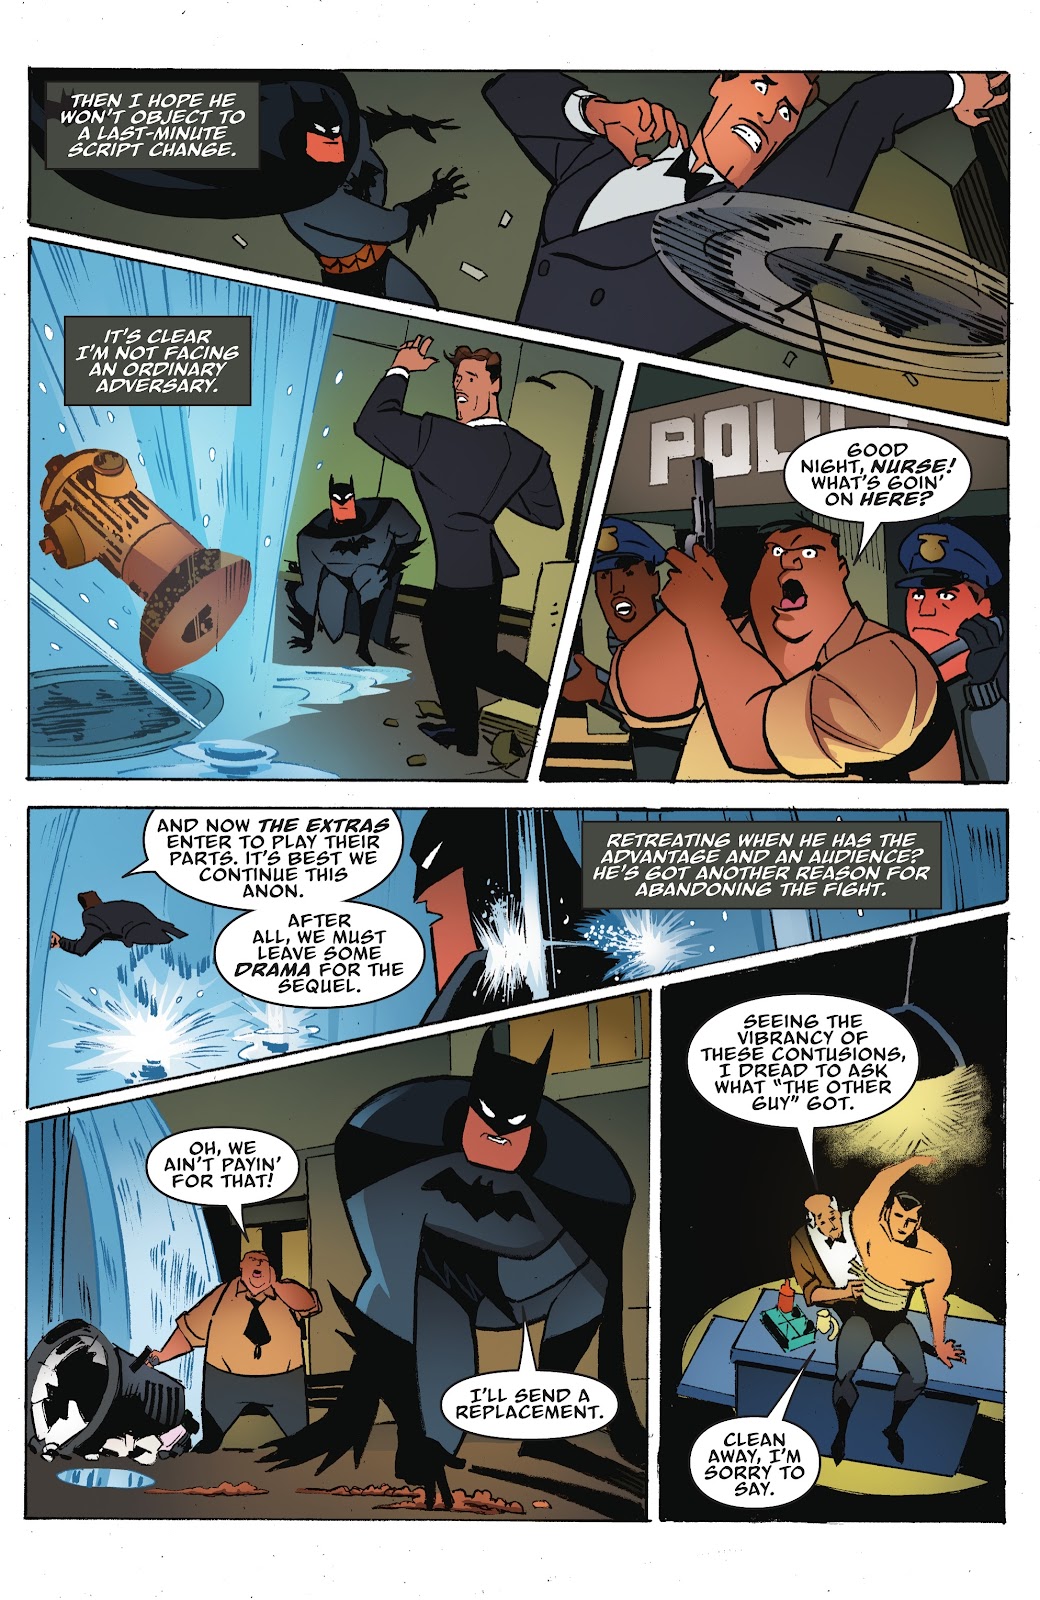 Batman: The Adventures Continue: Season Two issue 6 - Page 14